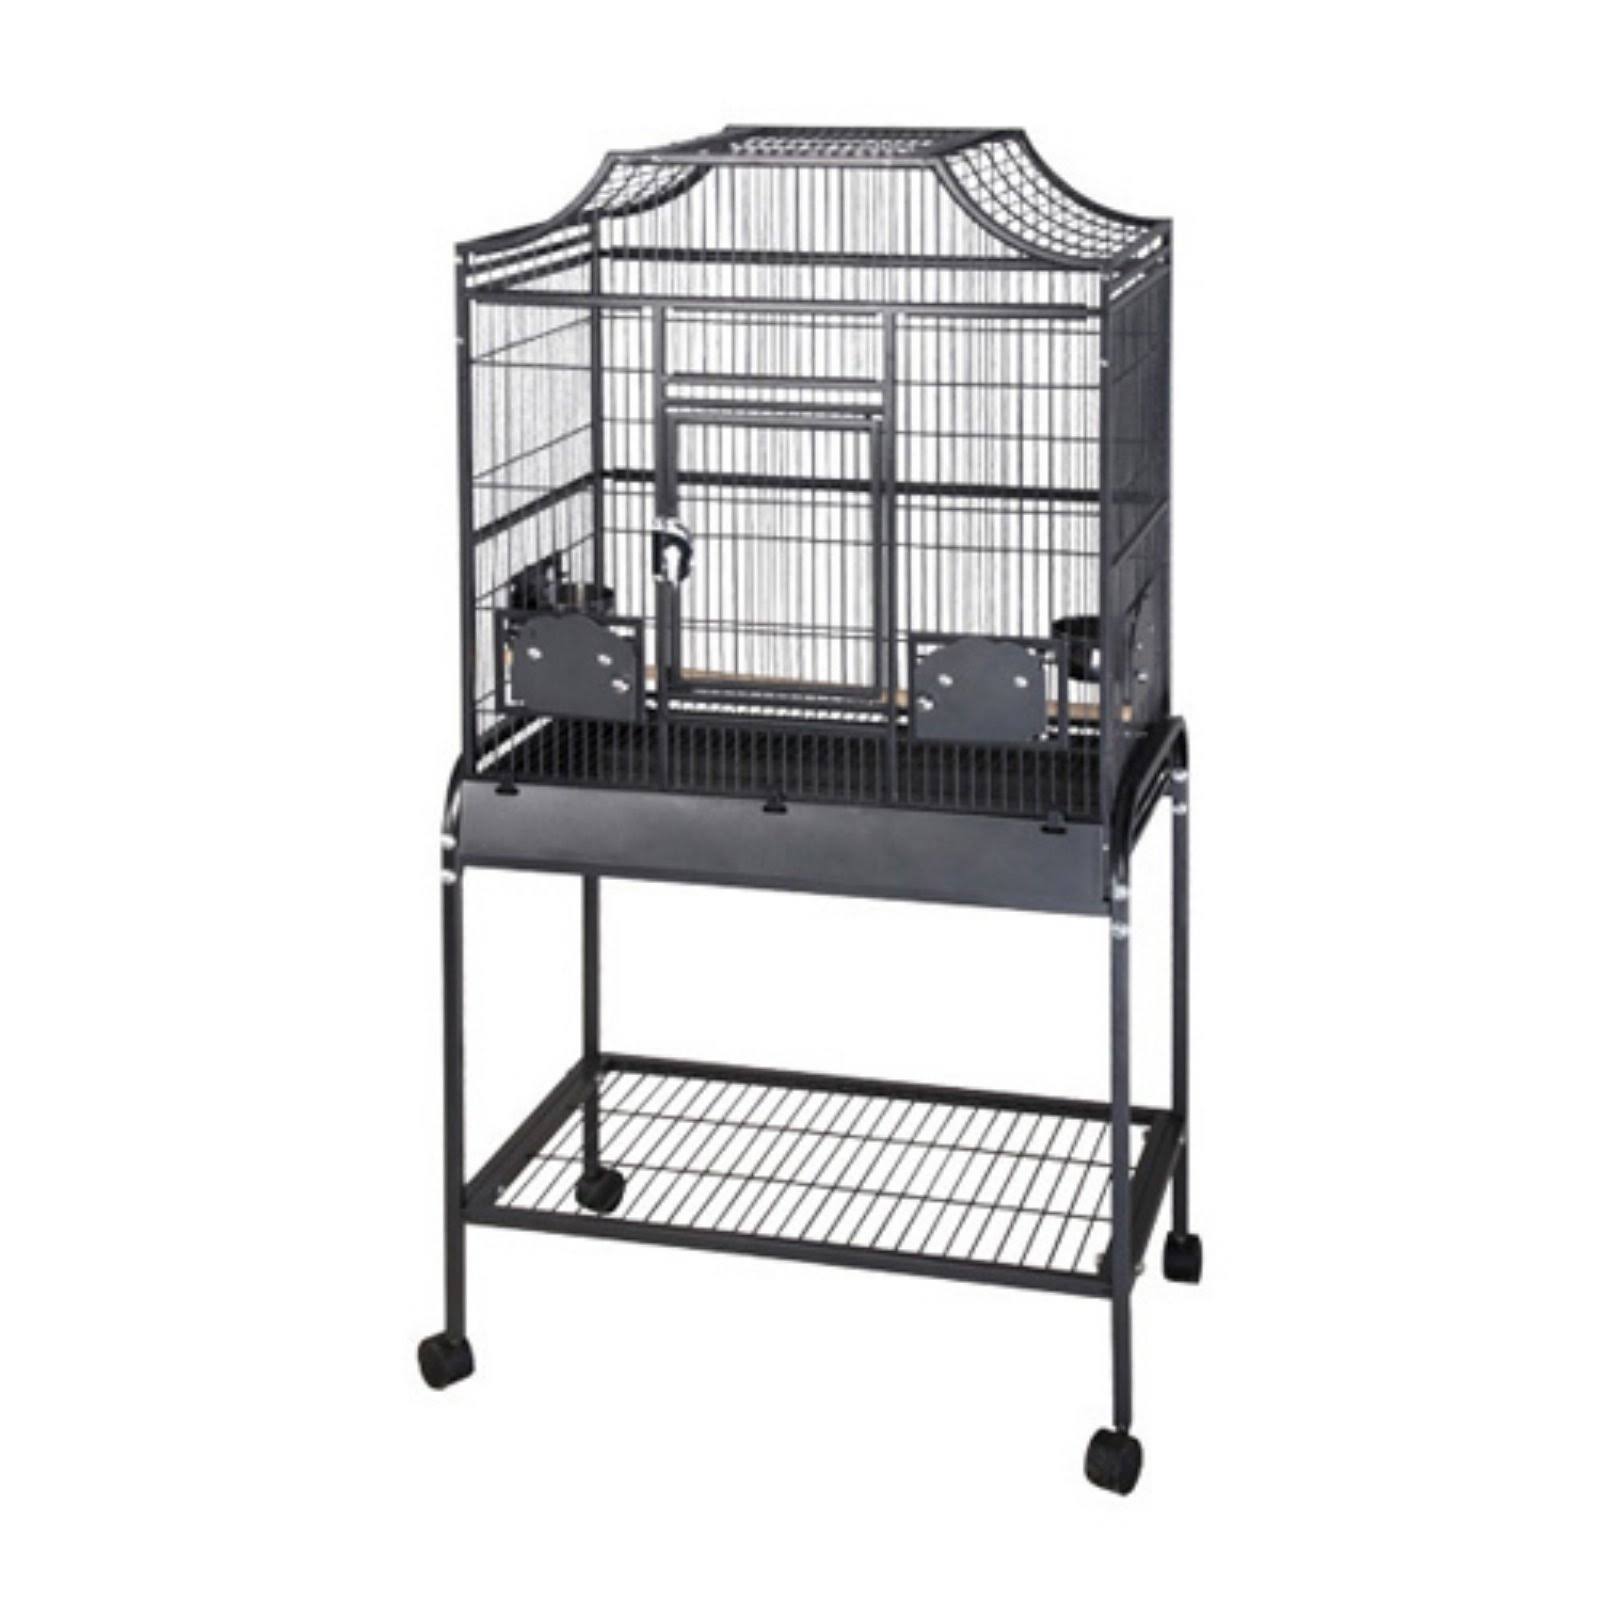 A and E Cage Co. Elegant Style Bird Cage - Black